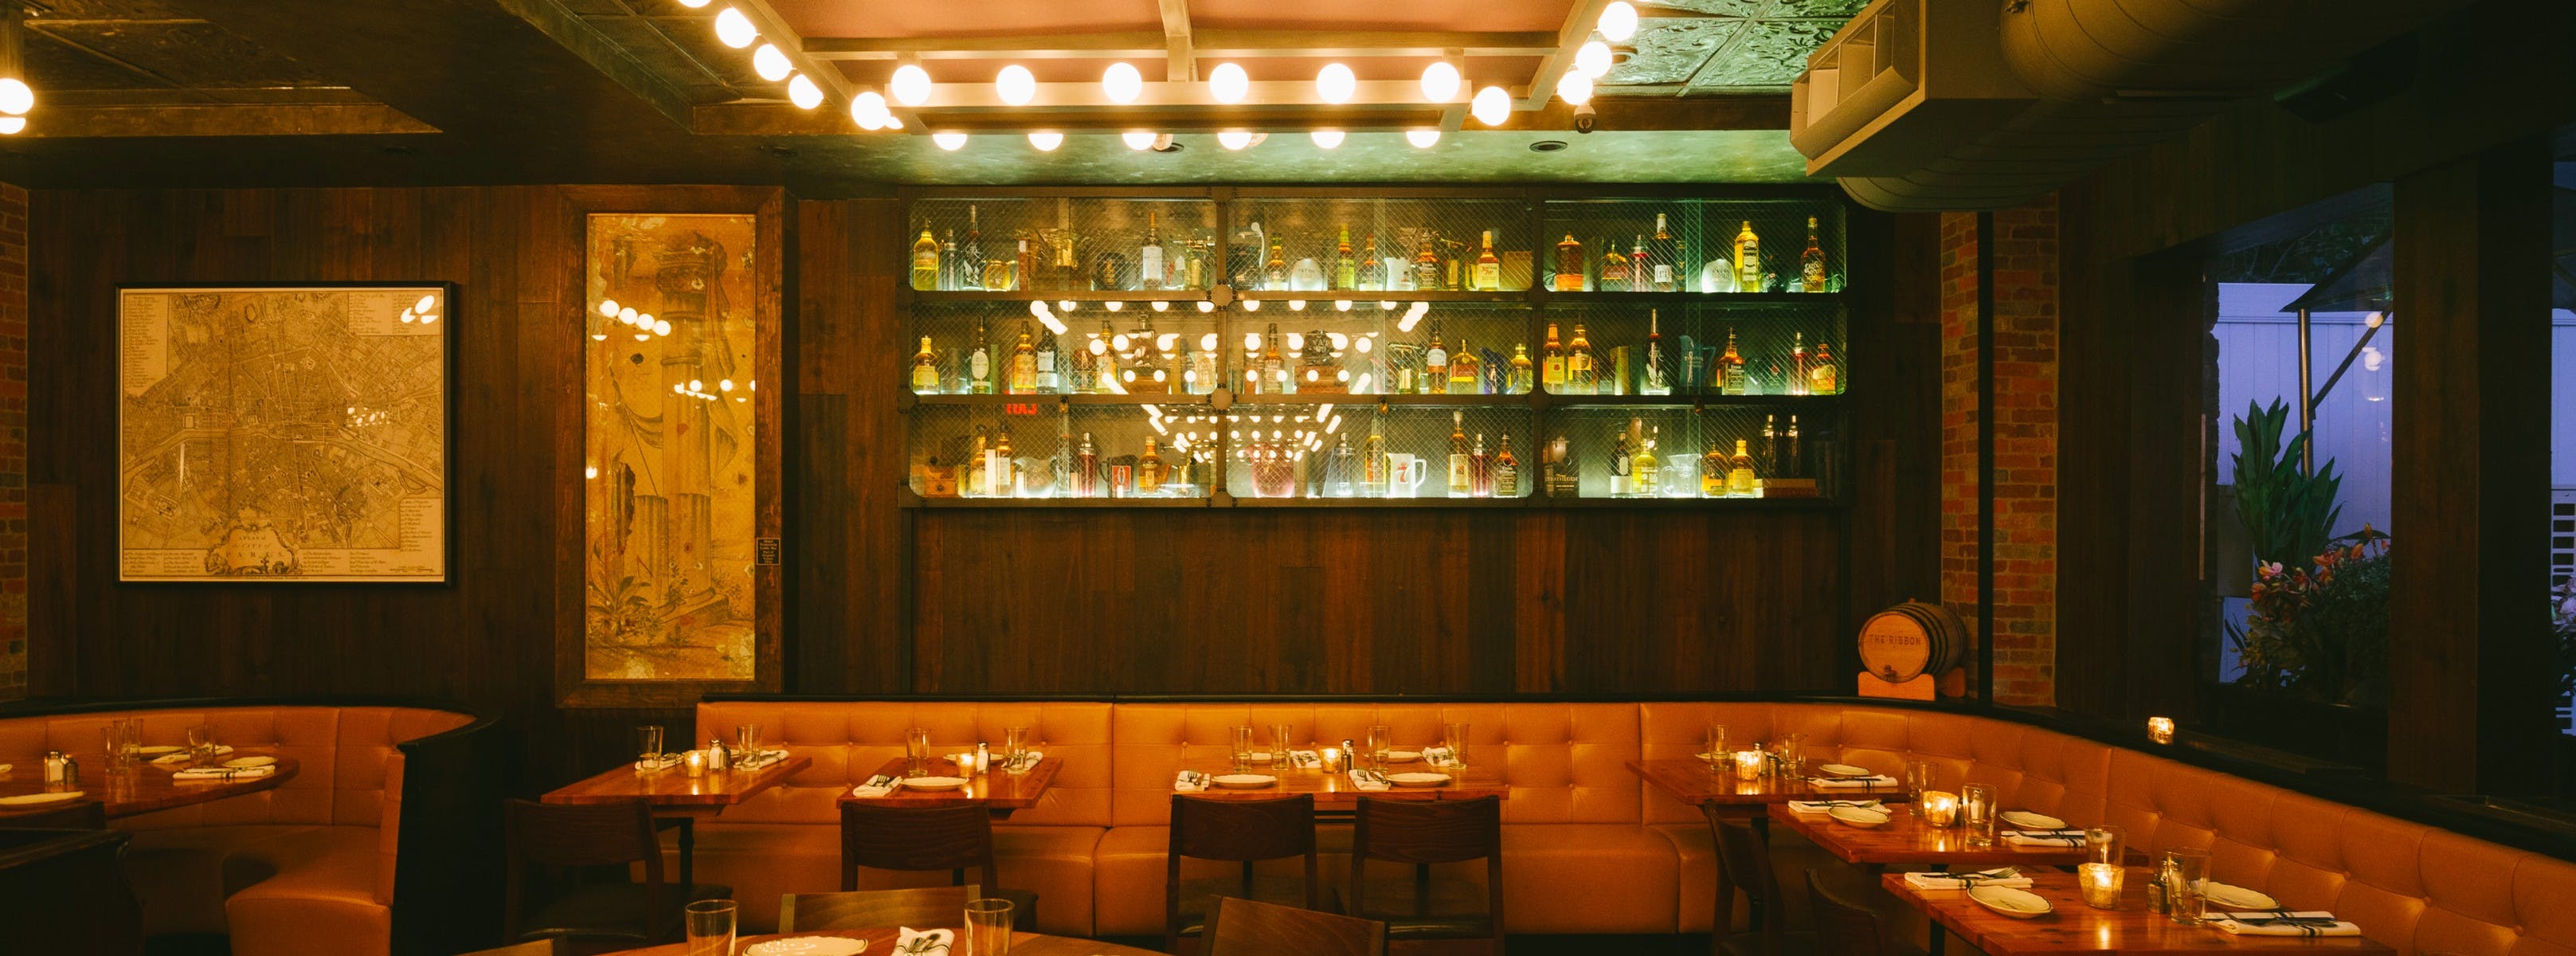 The Ribbon Review - Upper West Side - New York - The Infatuation